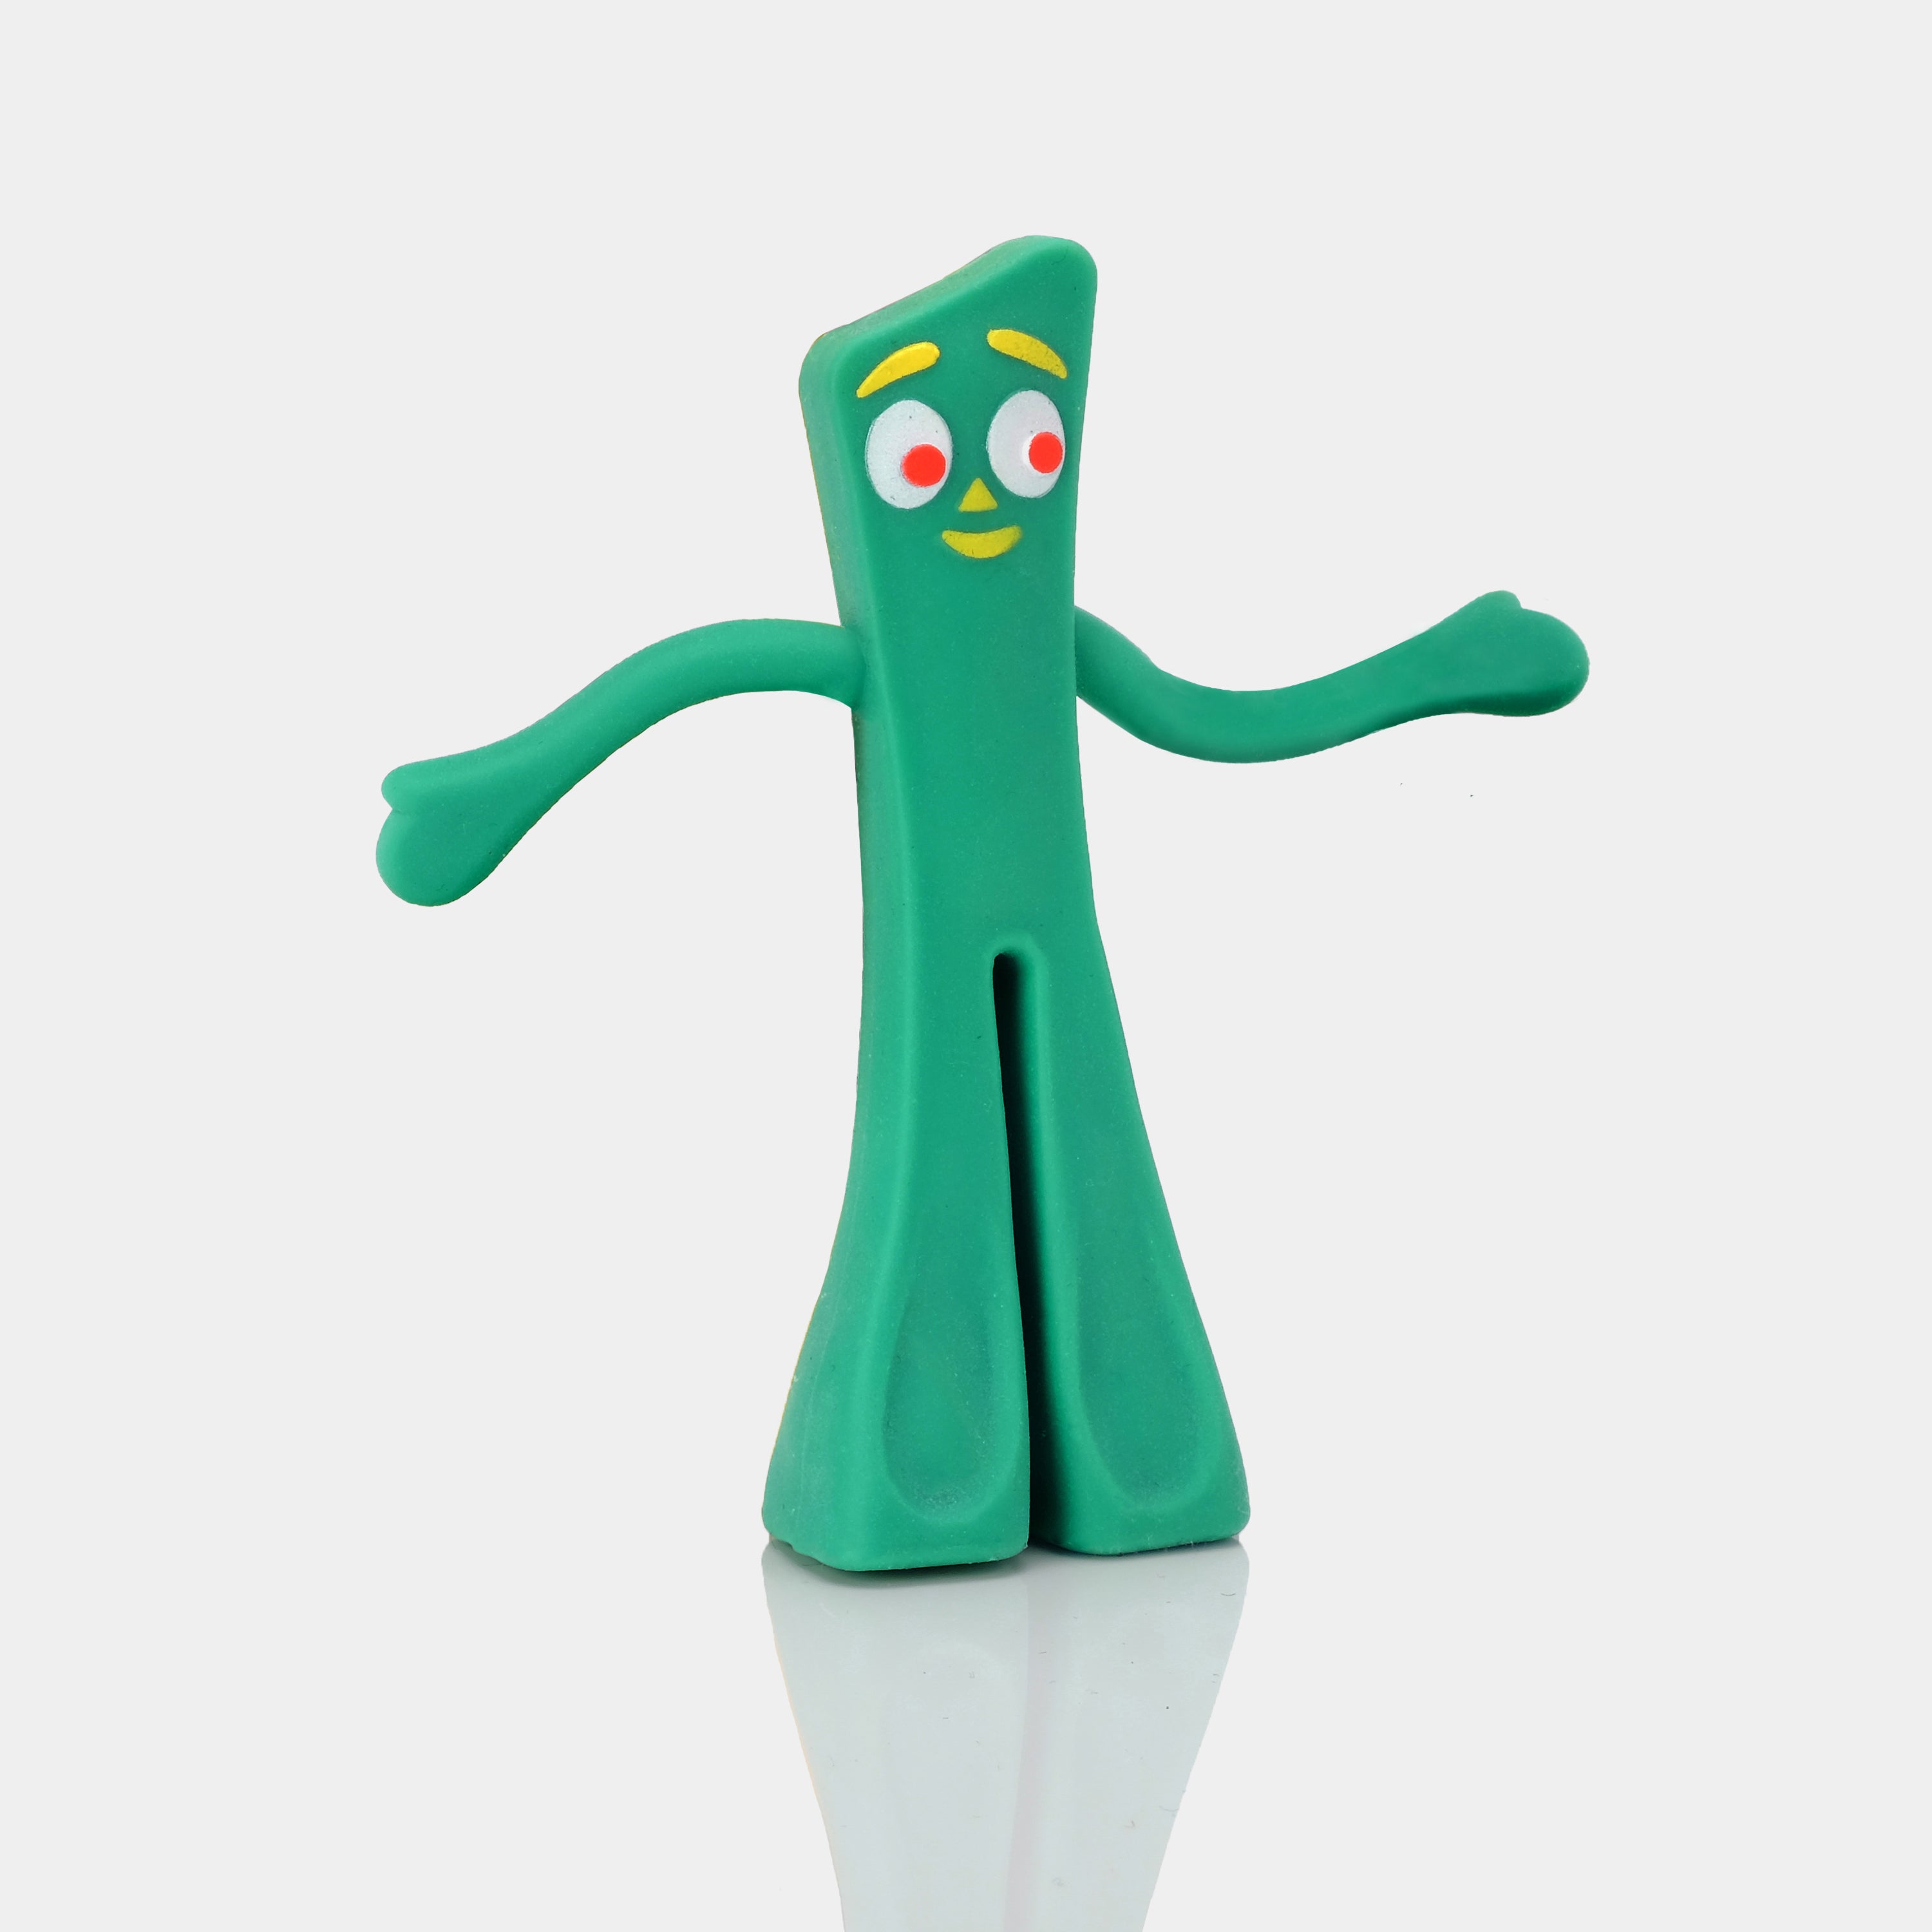 World’s Smallest Stretchy Gumby